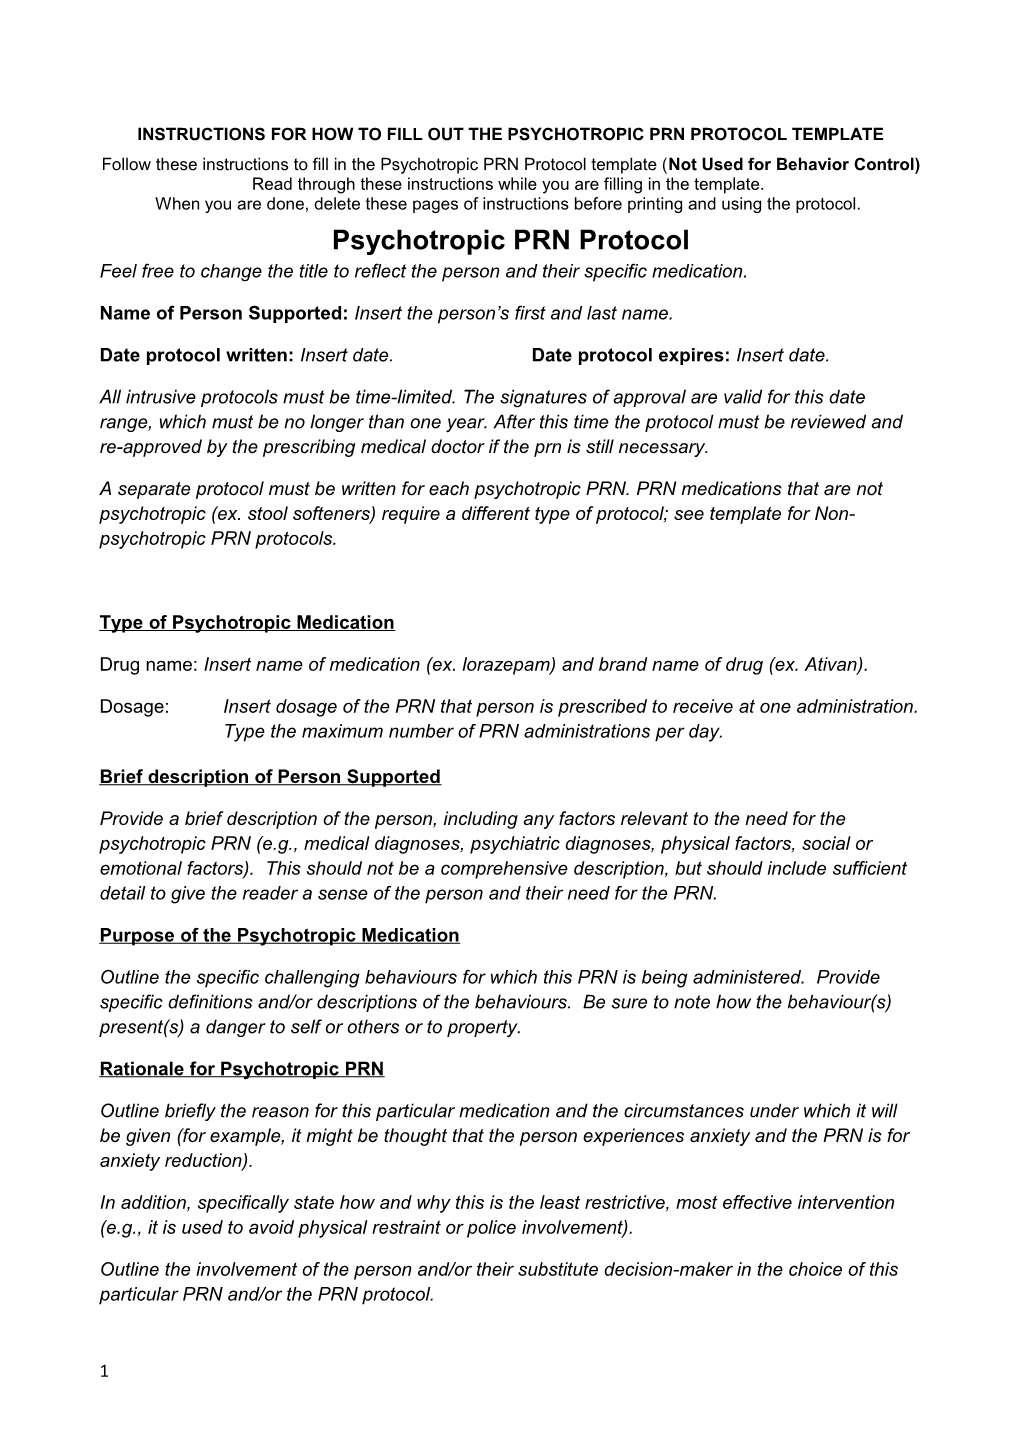 Instructions for How to Fill out the Psychotropic Prn Protocol Template